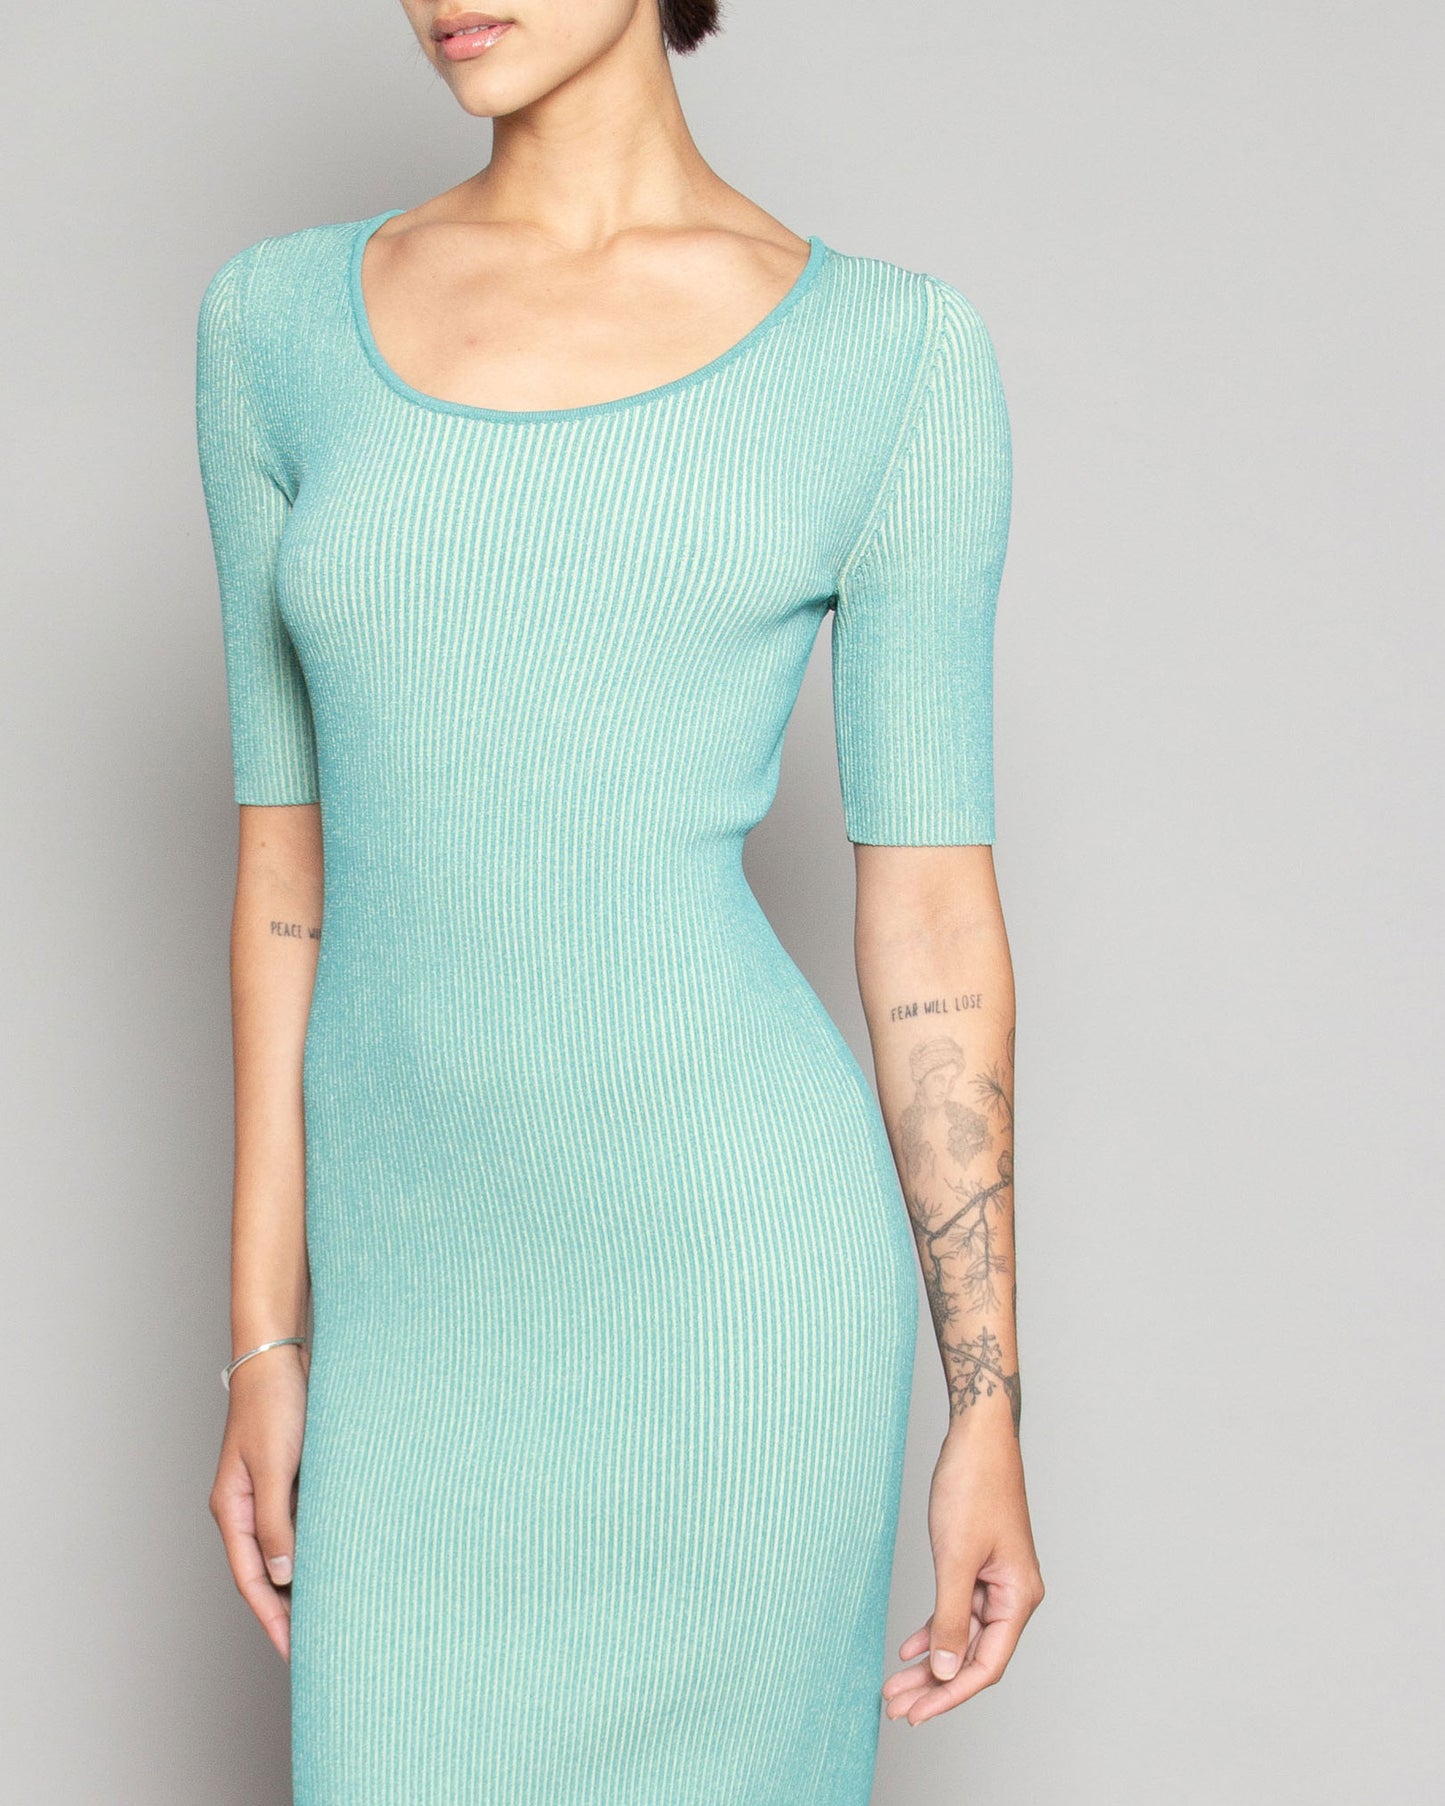 BEATRICE.B Knitted Keyhole Midi Dress in Poseidon Green available at Lahn.shop